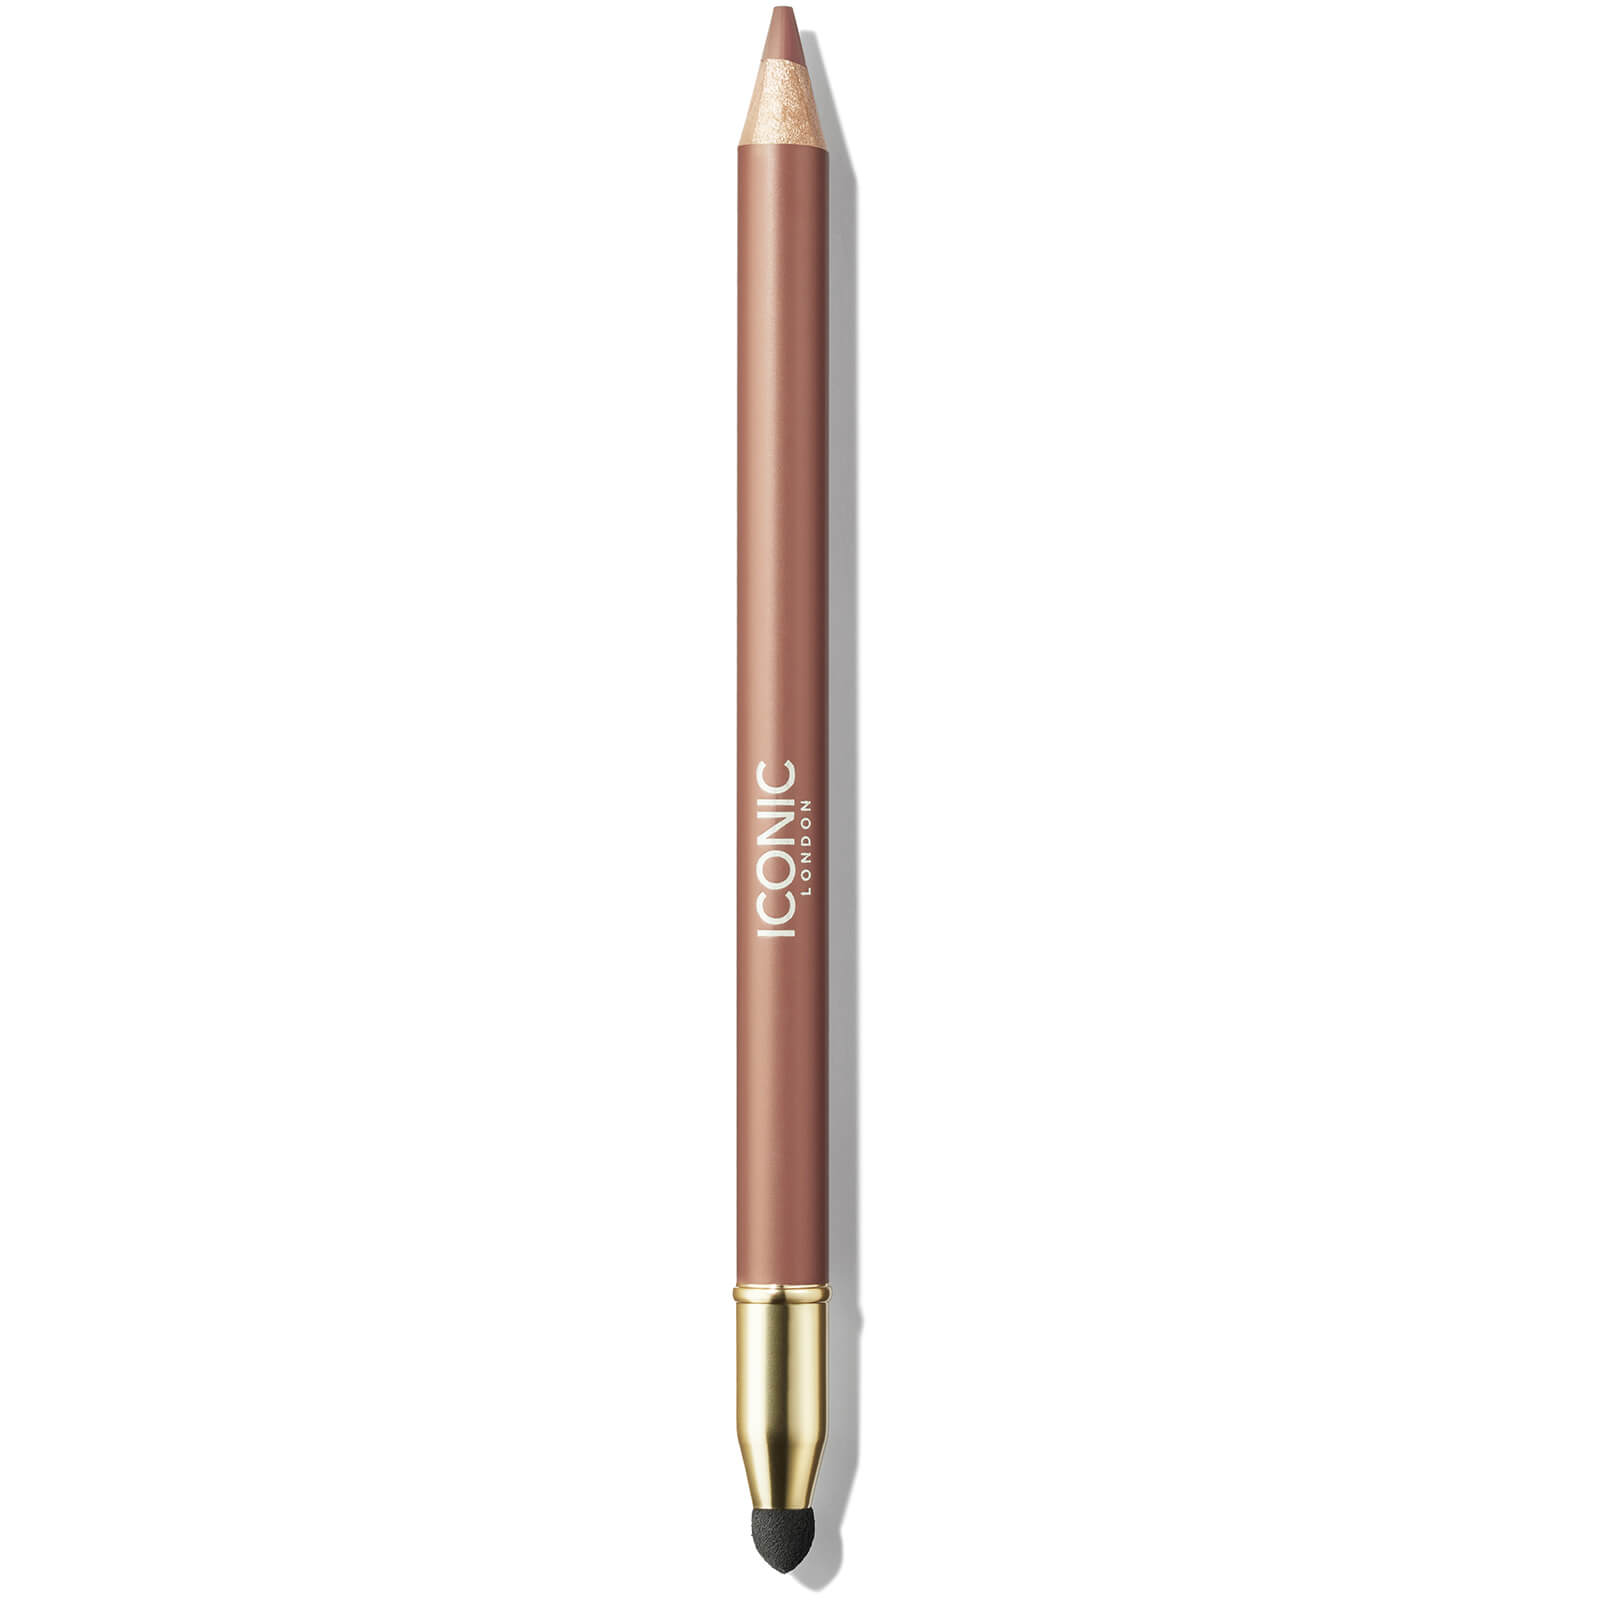 Iconic London Fuller Pout Sculpting Liner Liner 1.03g (various Shades) - Material Girl